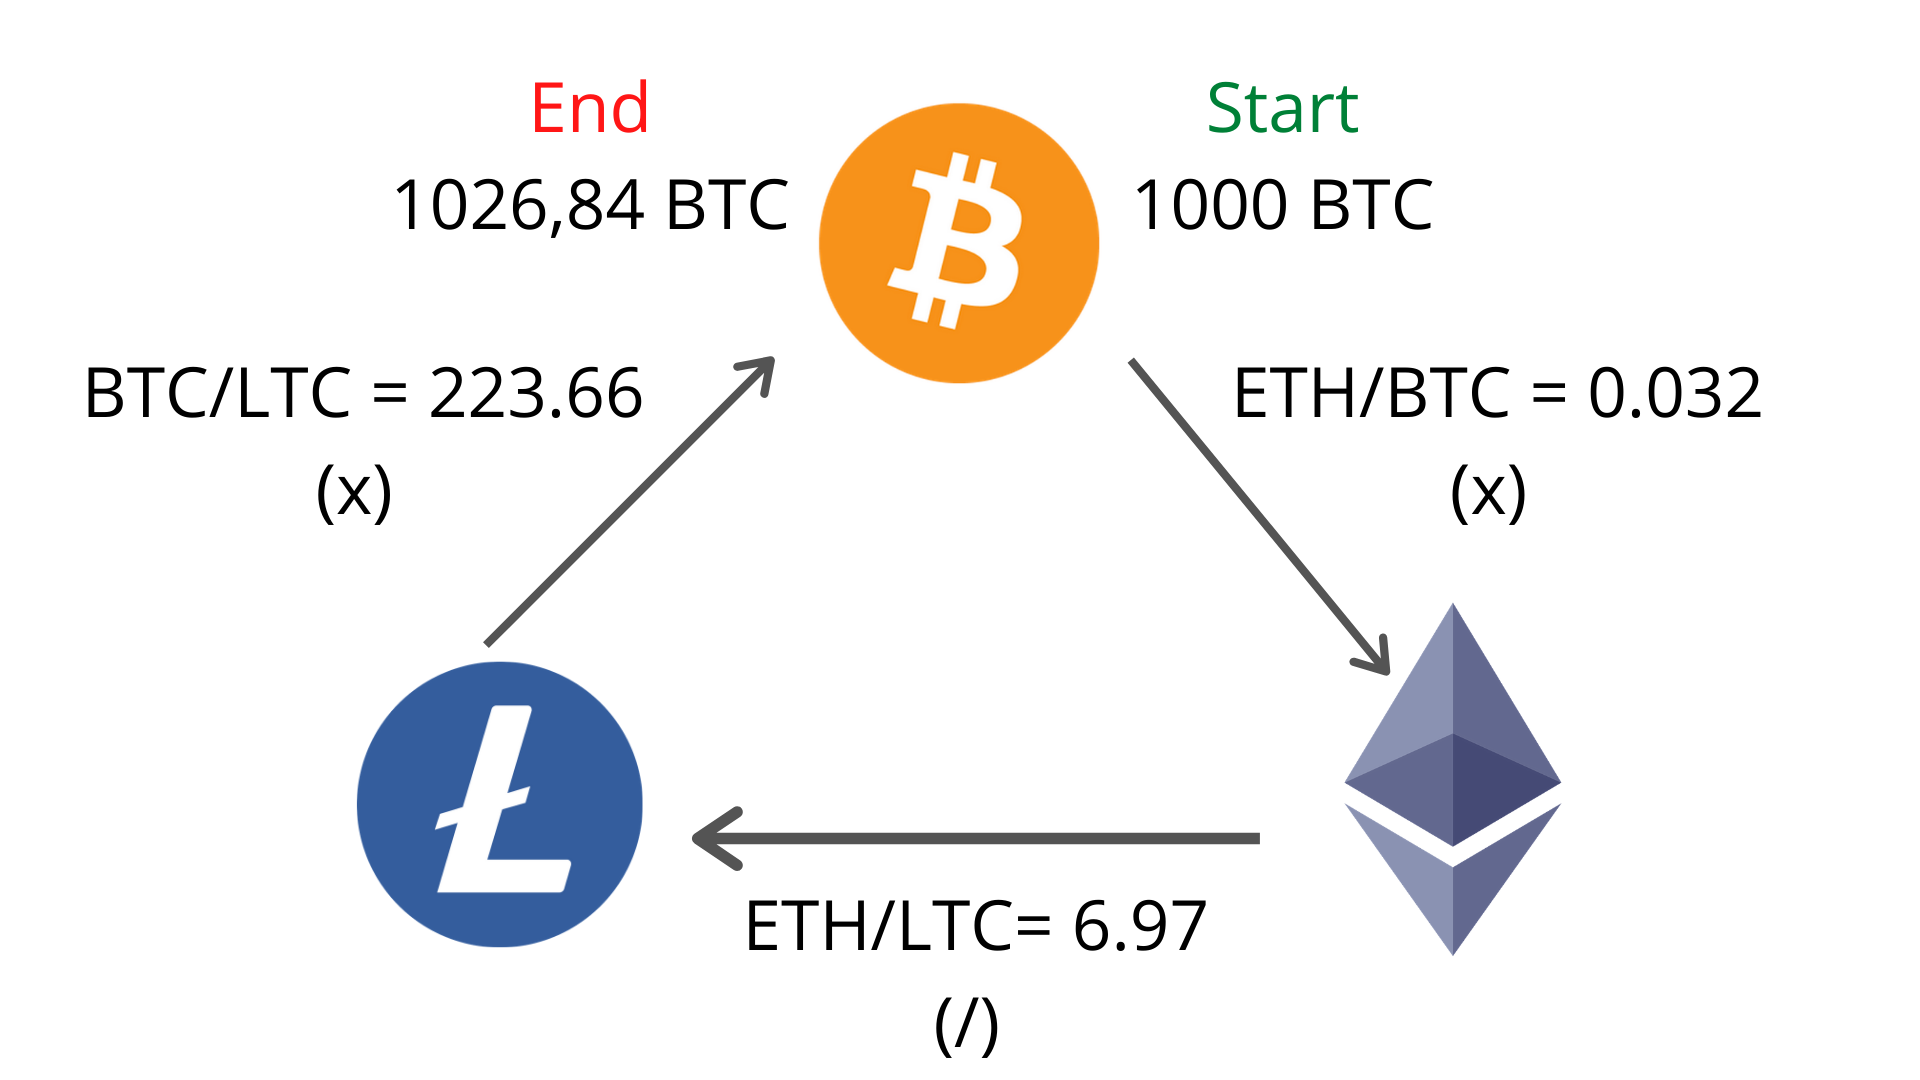 What is Crypto Arbitrage and How to Start Arbitrage Trading?